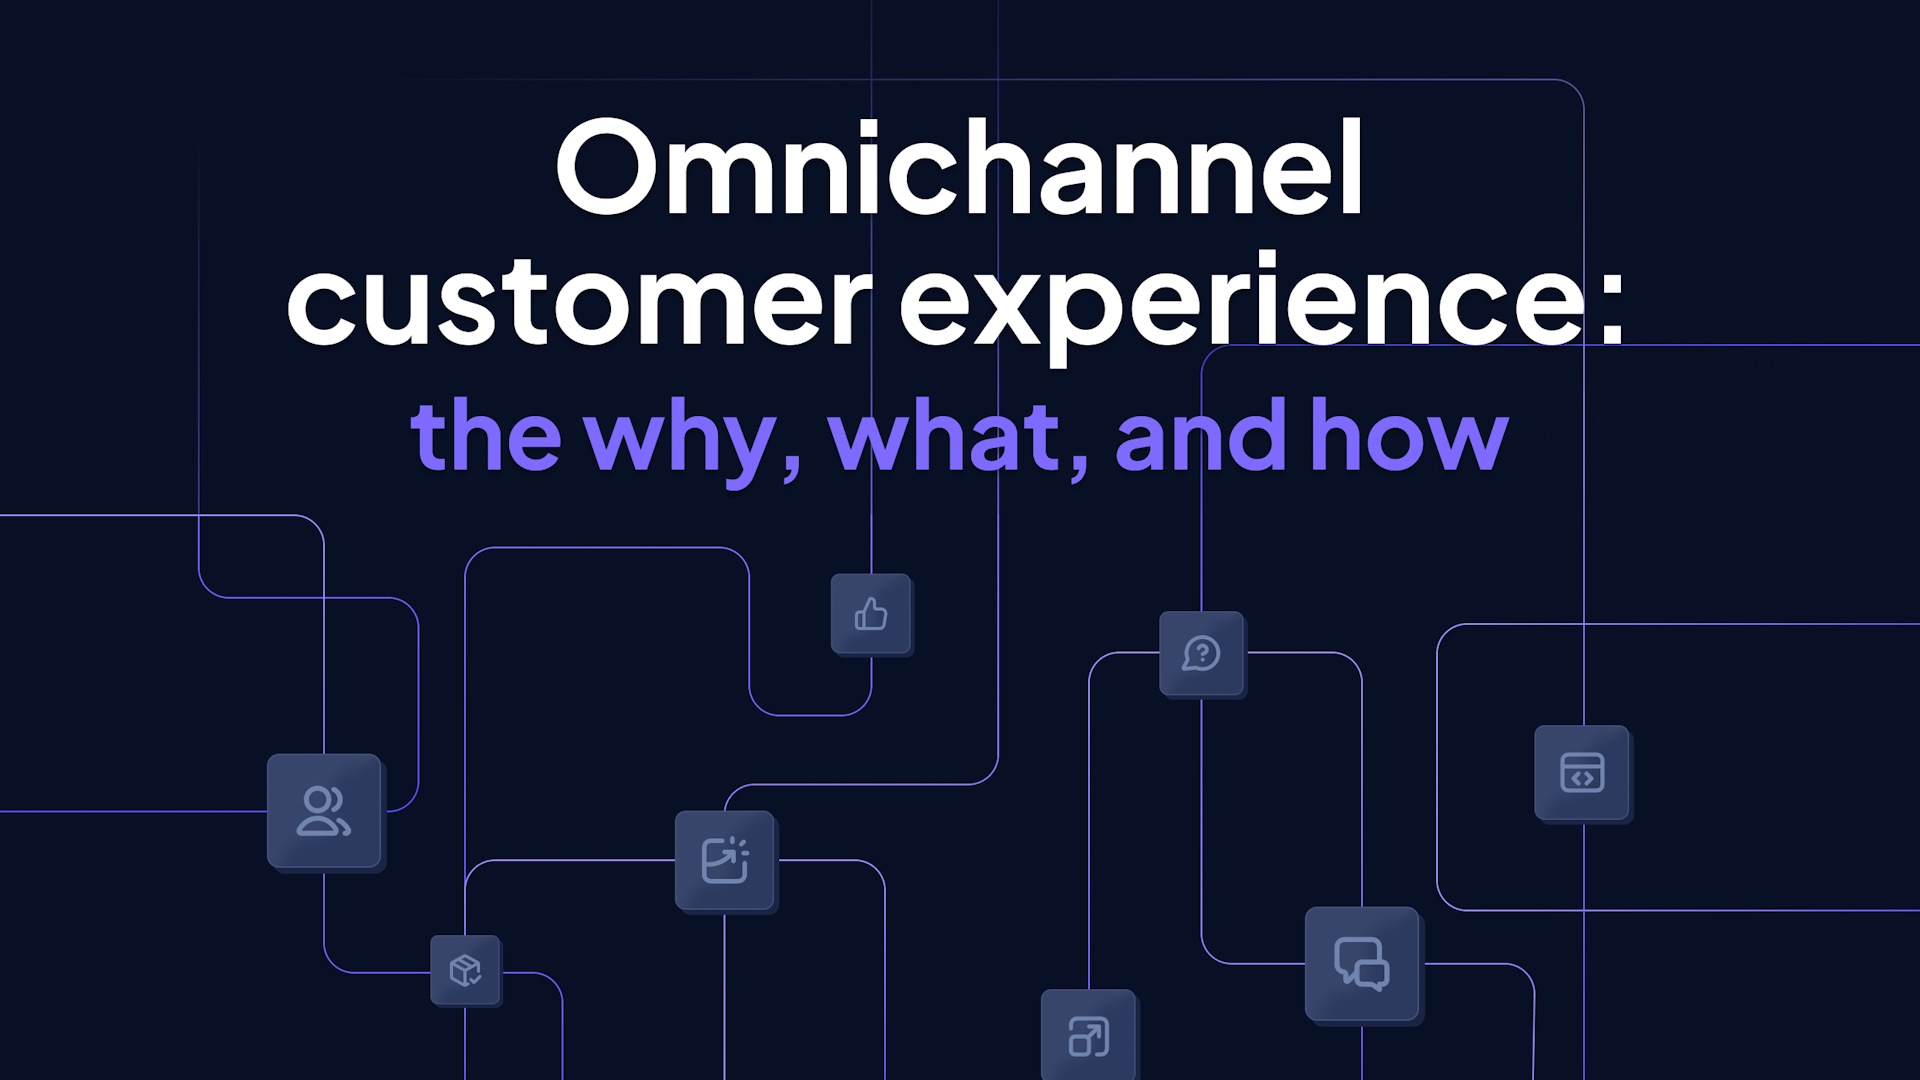 Omnichannel customer experience: the why, what, and how